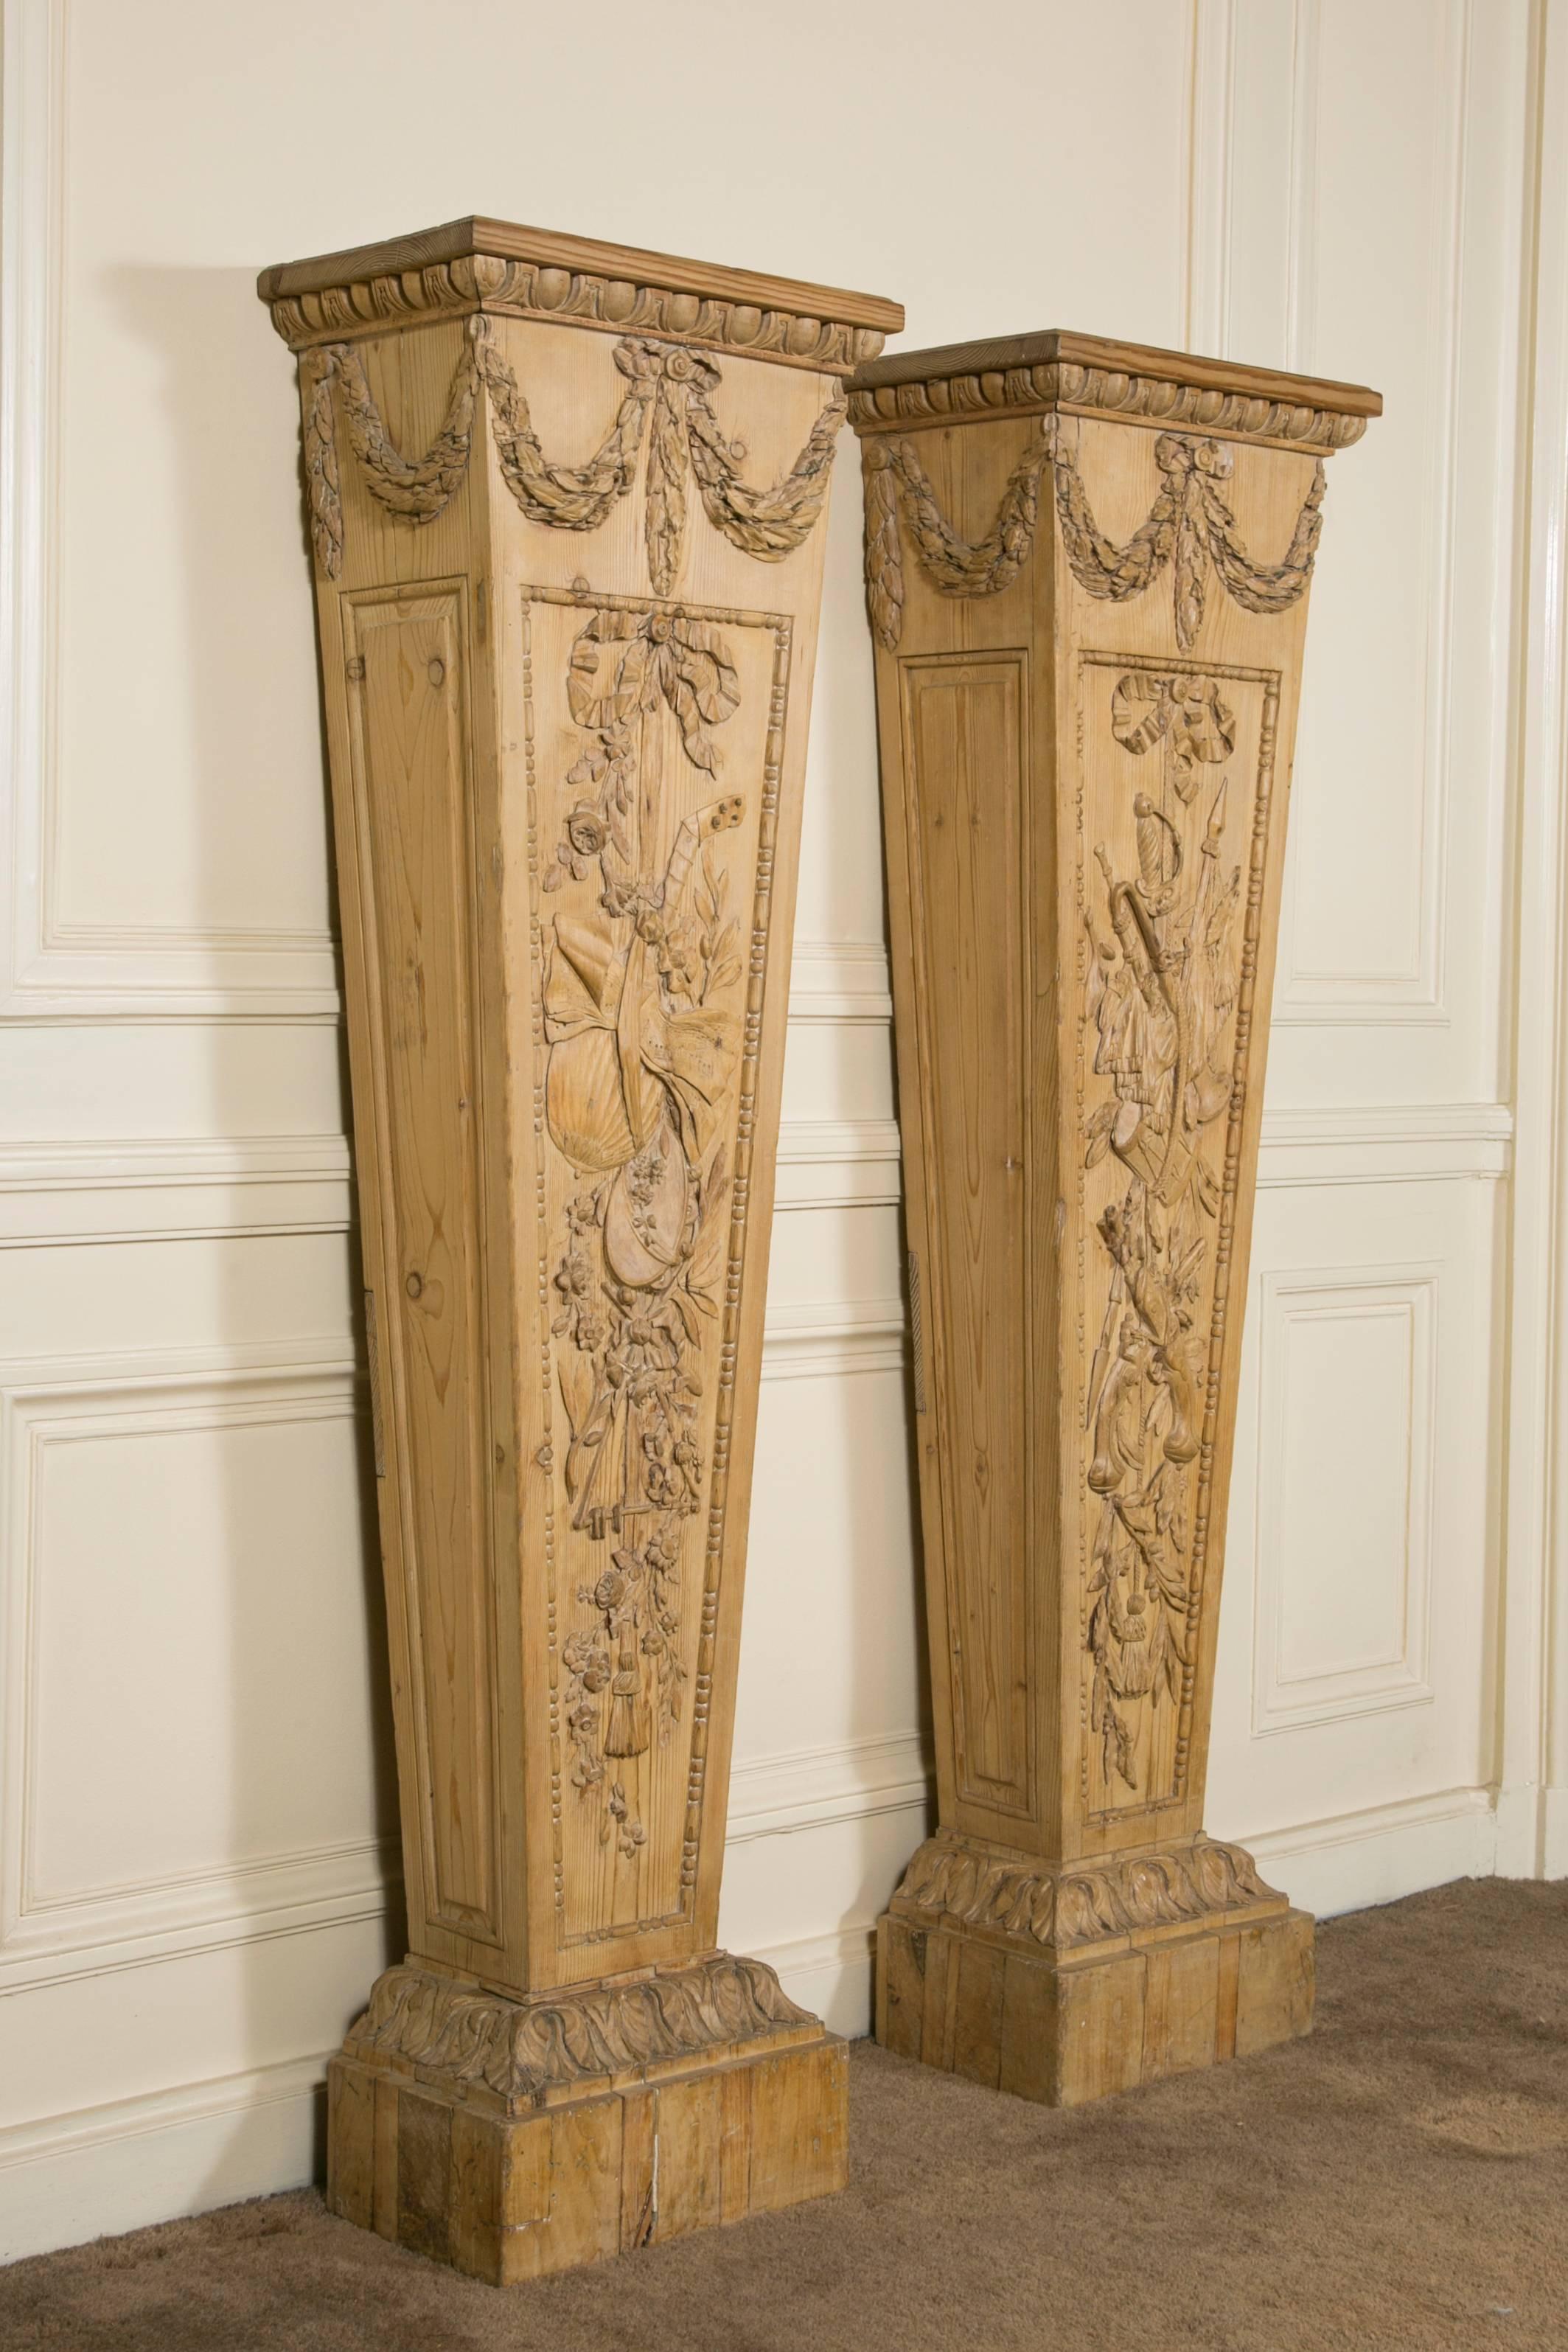 Very fine and rare pair of pedestals in pinewood, with different carving on each one representing drum, tambourin, horn, mandoline, flags, pistols, sabre, ribbons with tassels etc. and different leafs and flowers.